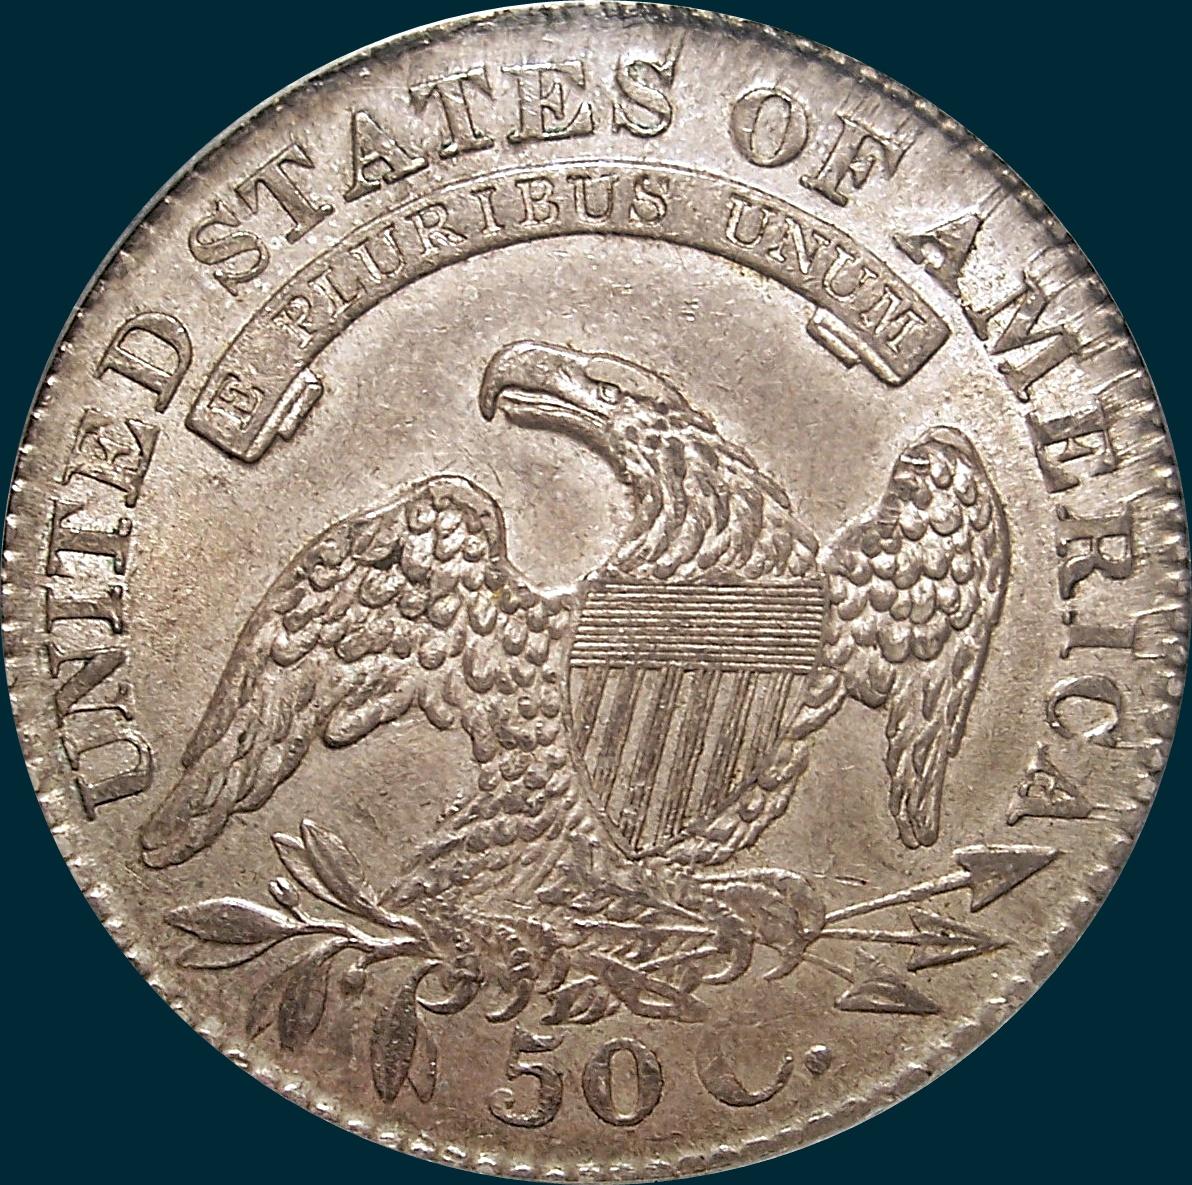 1830, O-106, Small 0, Capped Bust, Half Dollar